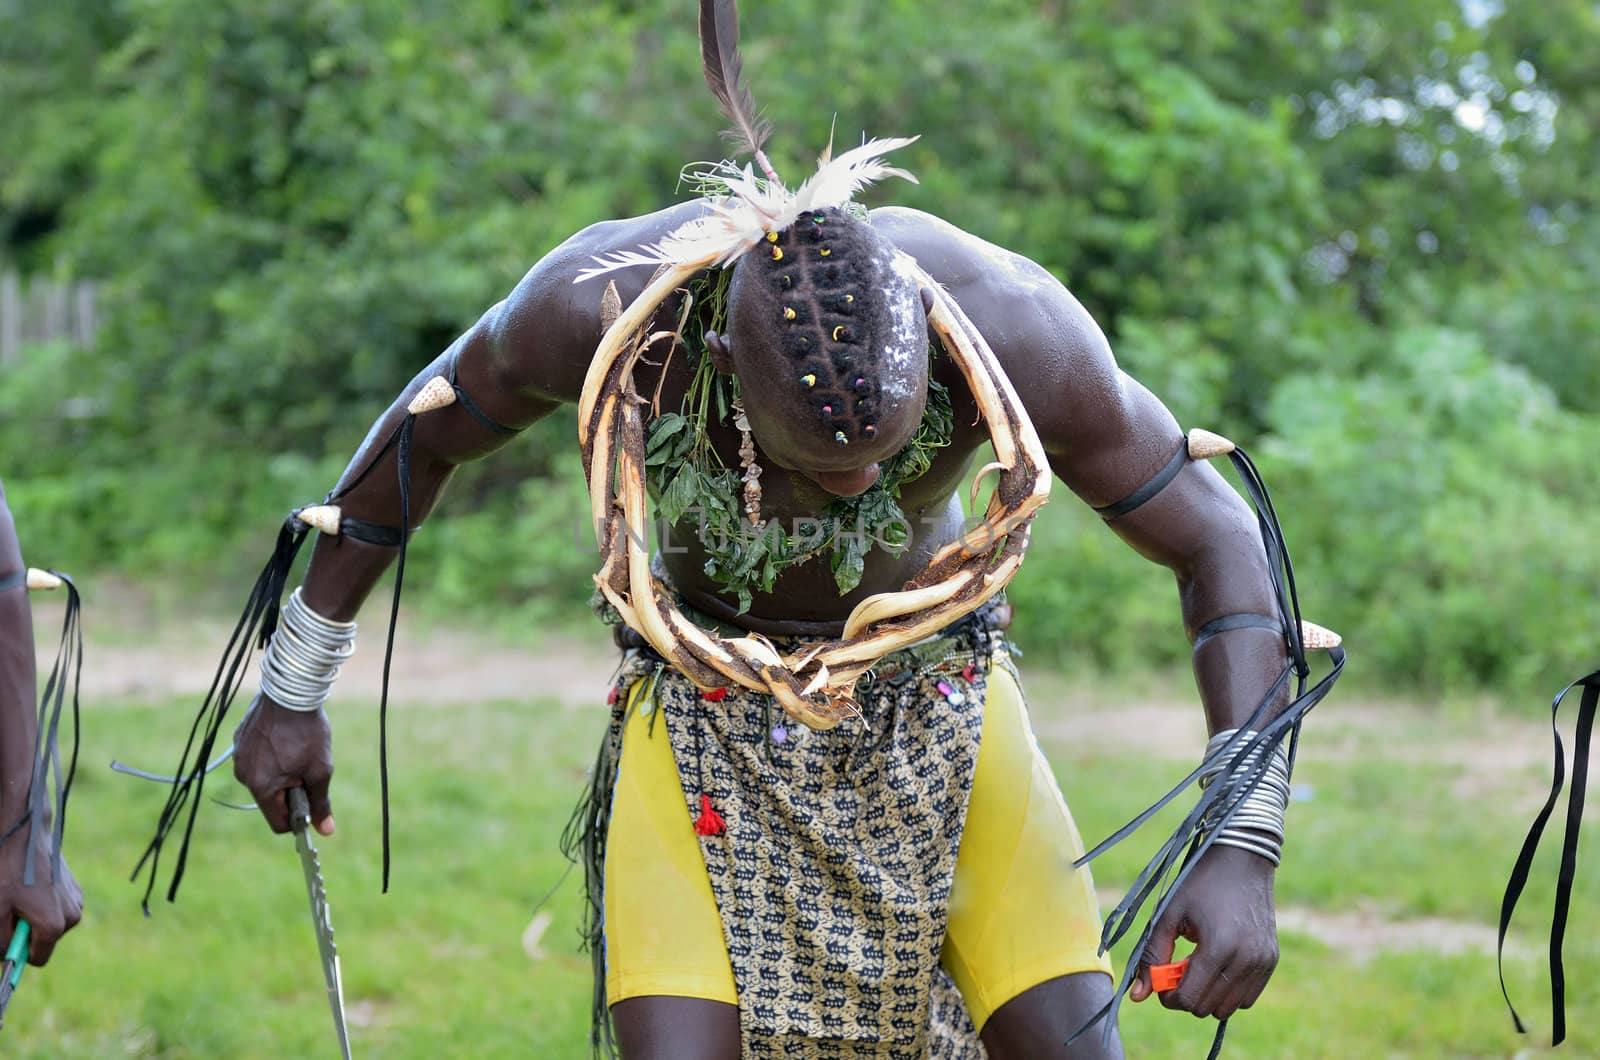 African man performs in a tribal dance